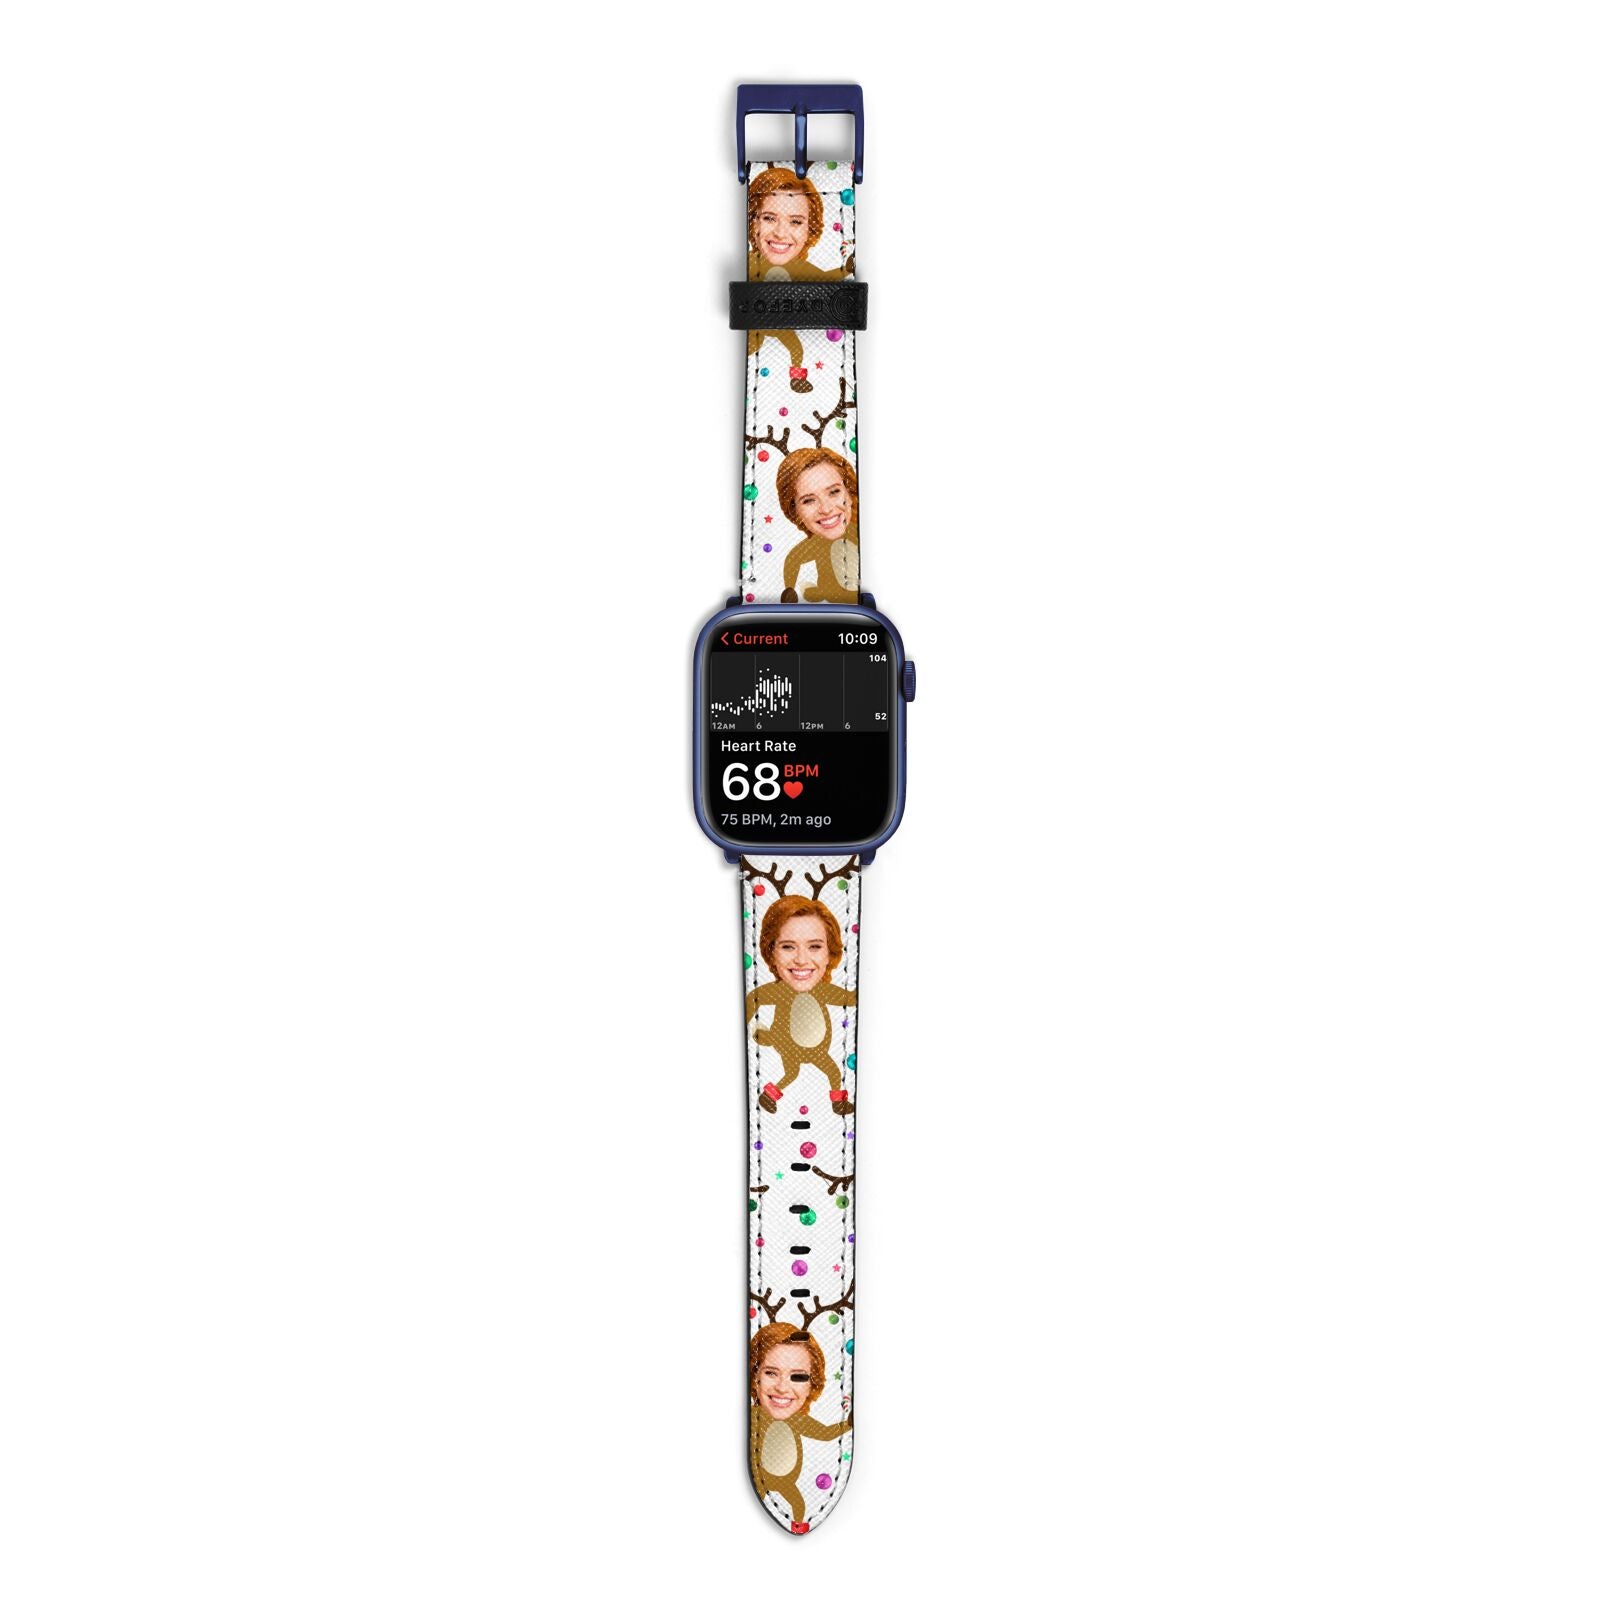 Reindeer Photo Face Apple Watch Strap Size 38mm with Blue Hardware